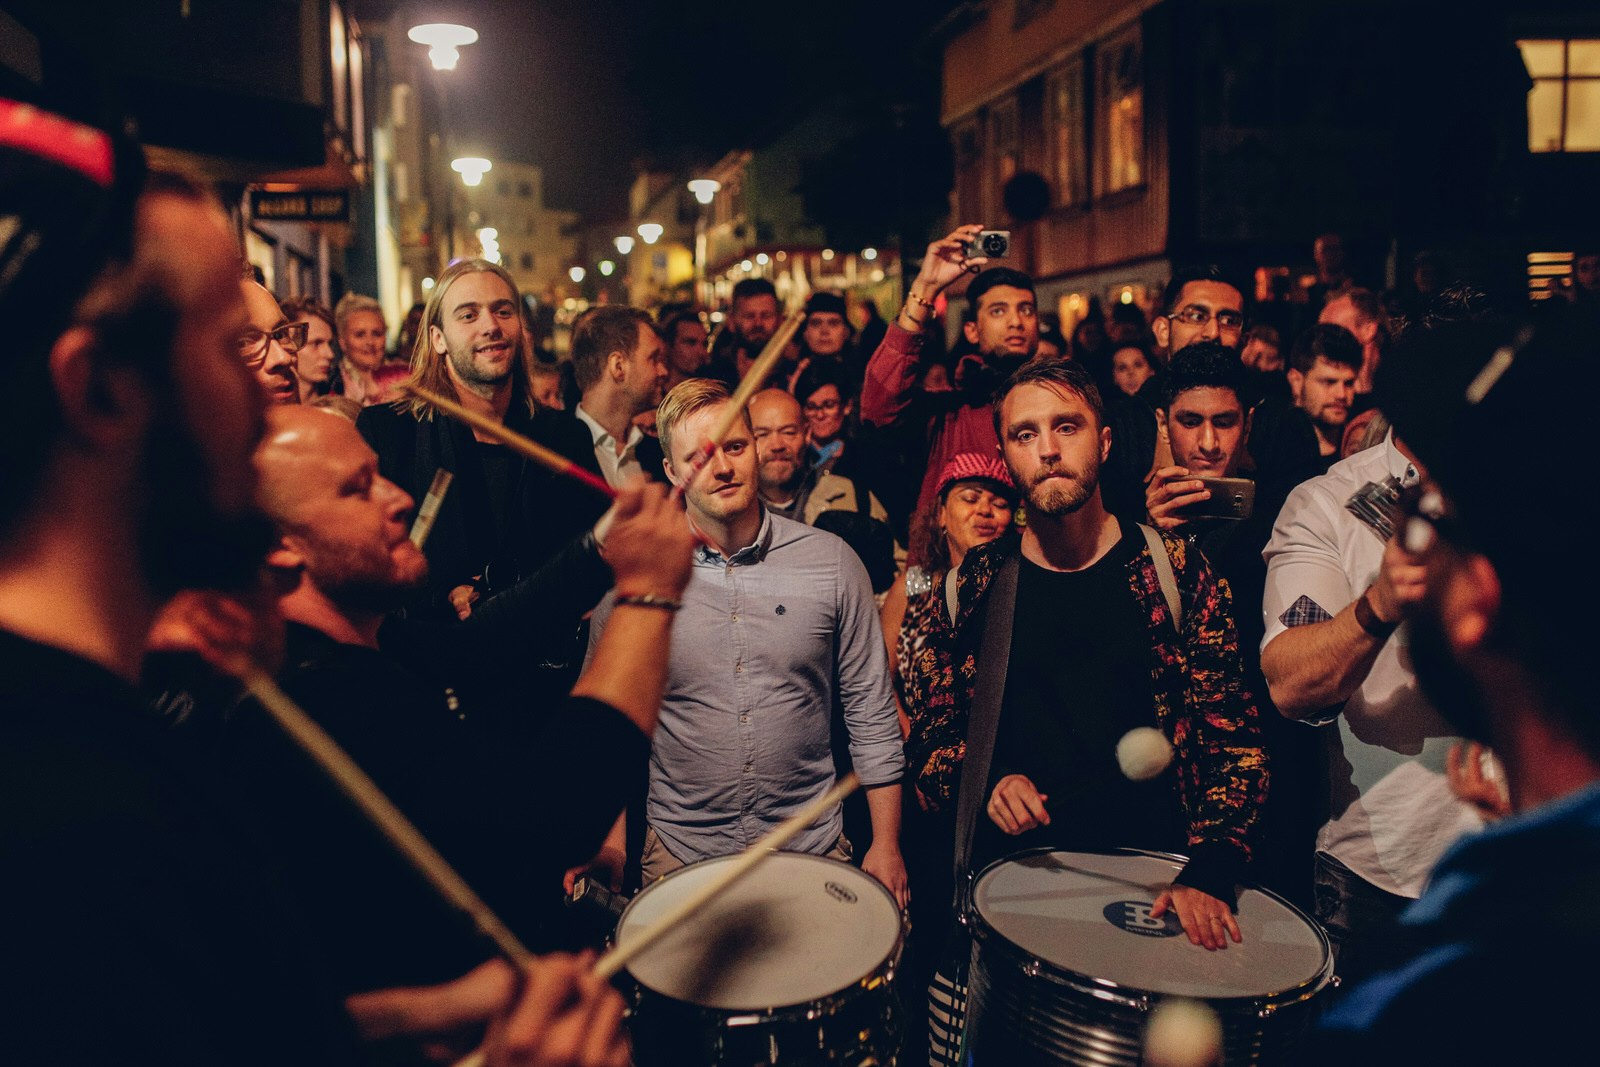 A large crowd gathered around a man playing a drum